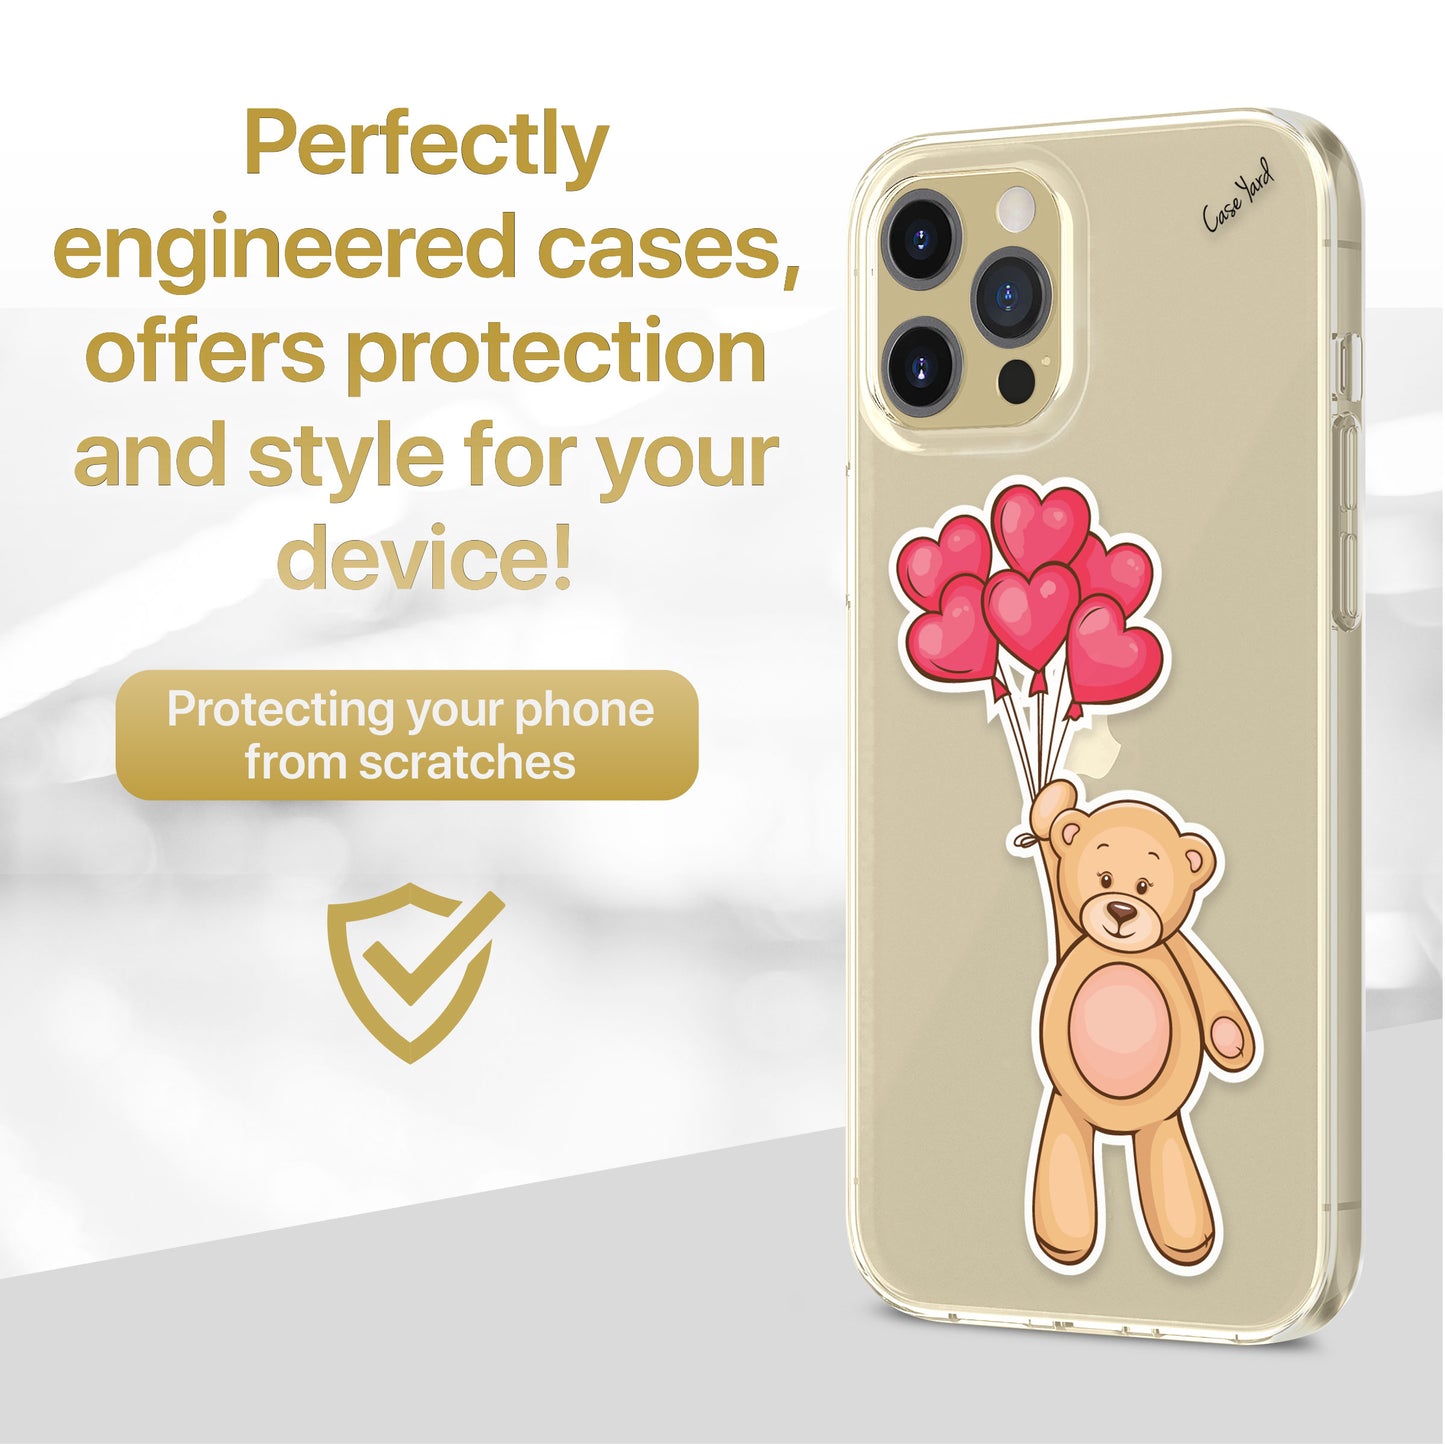 TPU Case Clear case with (Balloons and Teddy) Design for iPhone & Samsung Phones